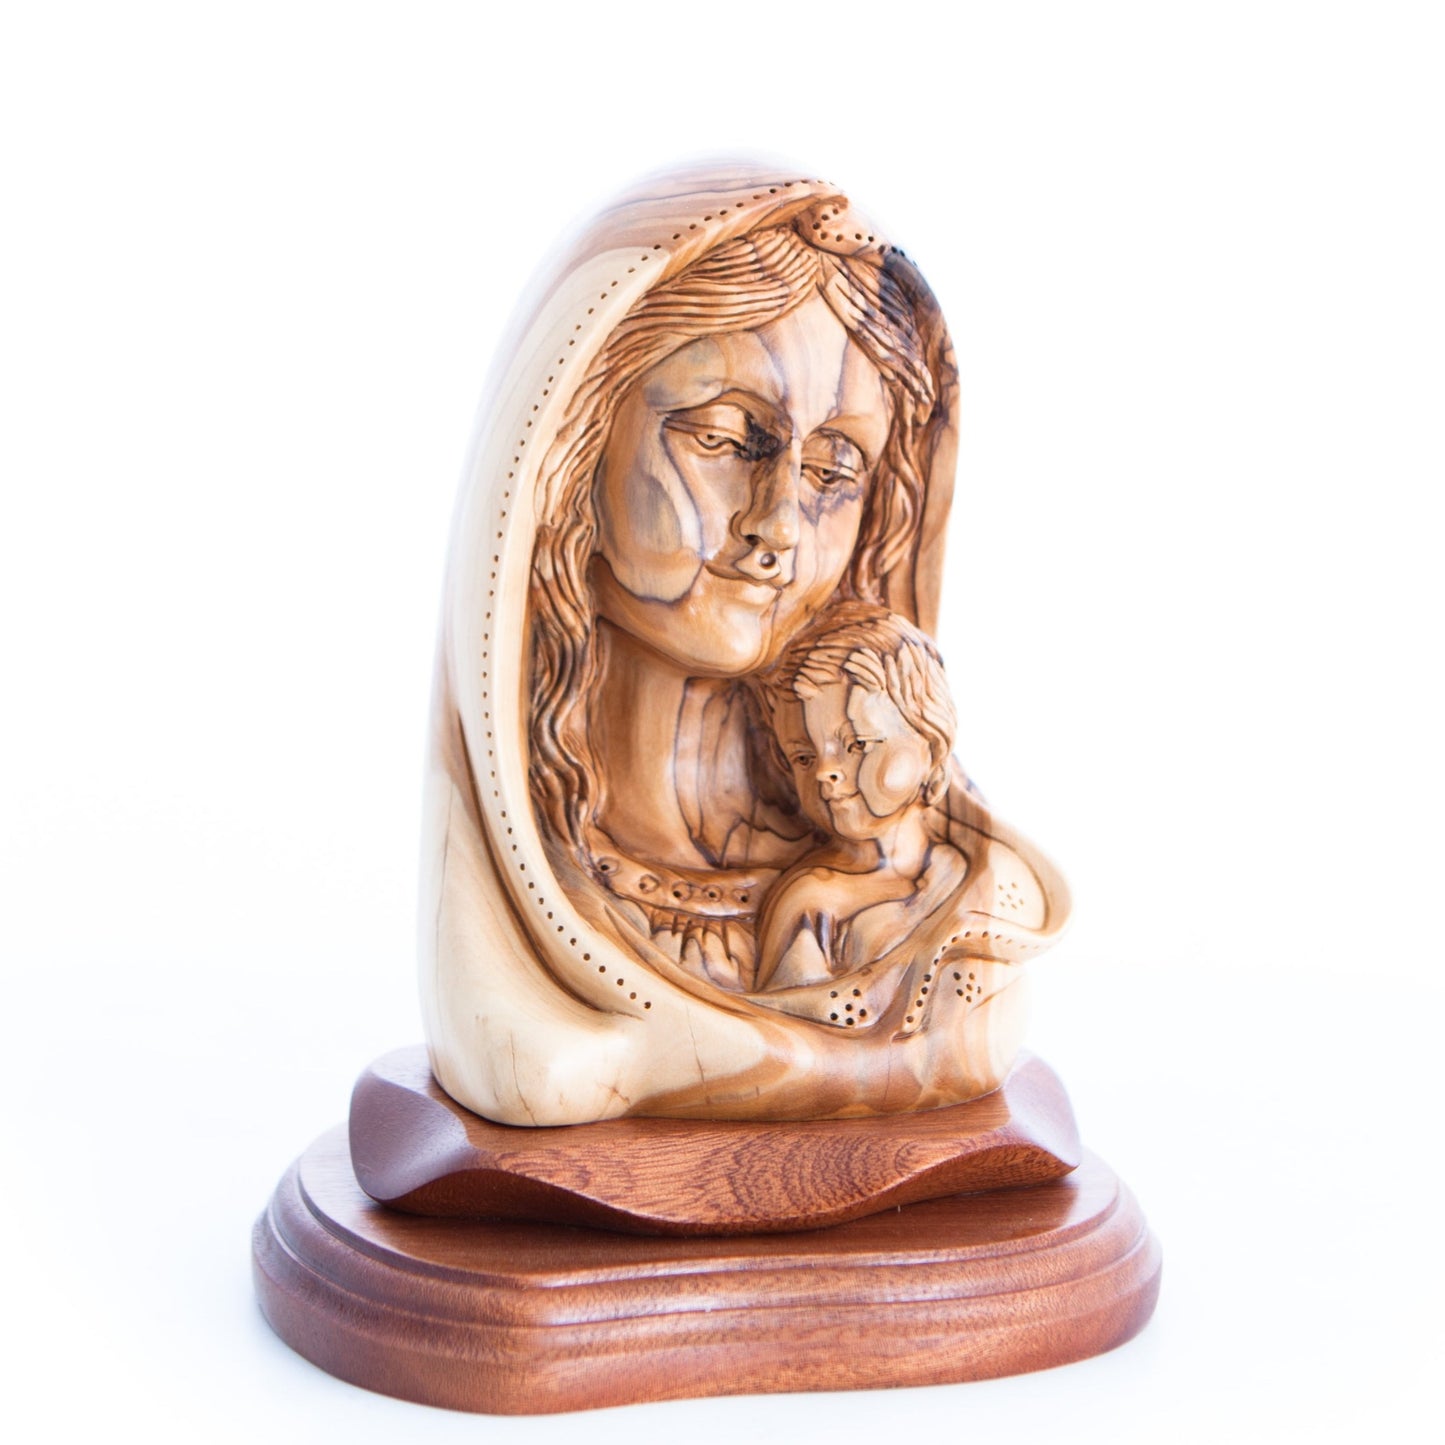 Virgin Mary with Baby Jesus Bust Statue, 7.5" Carving Olive Wood